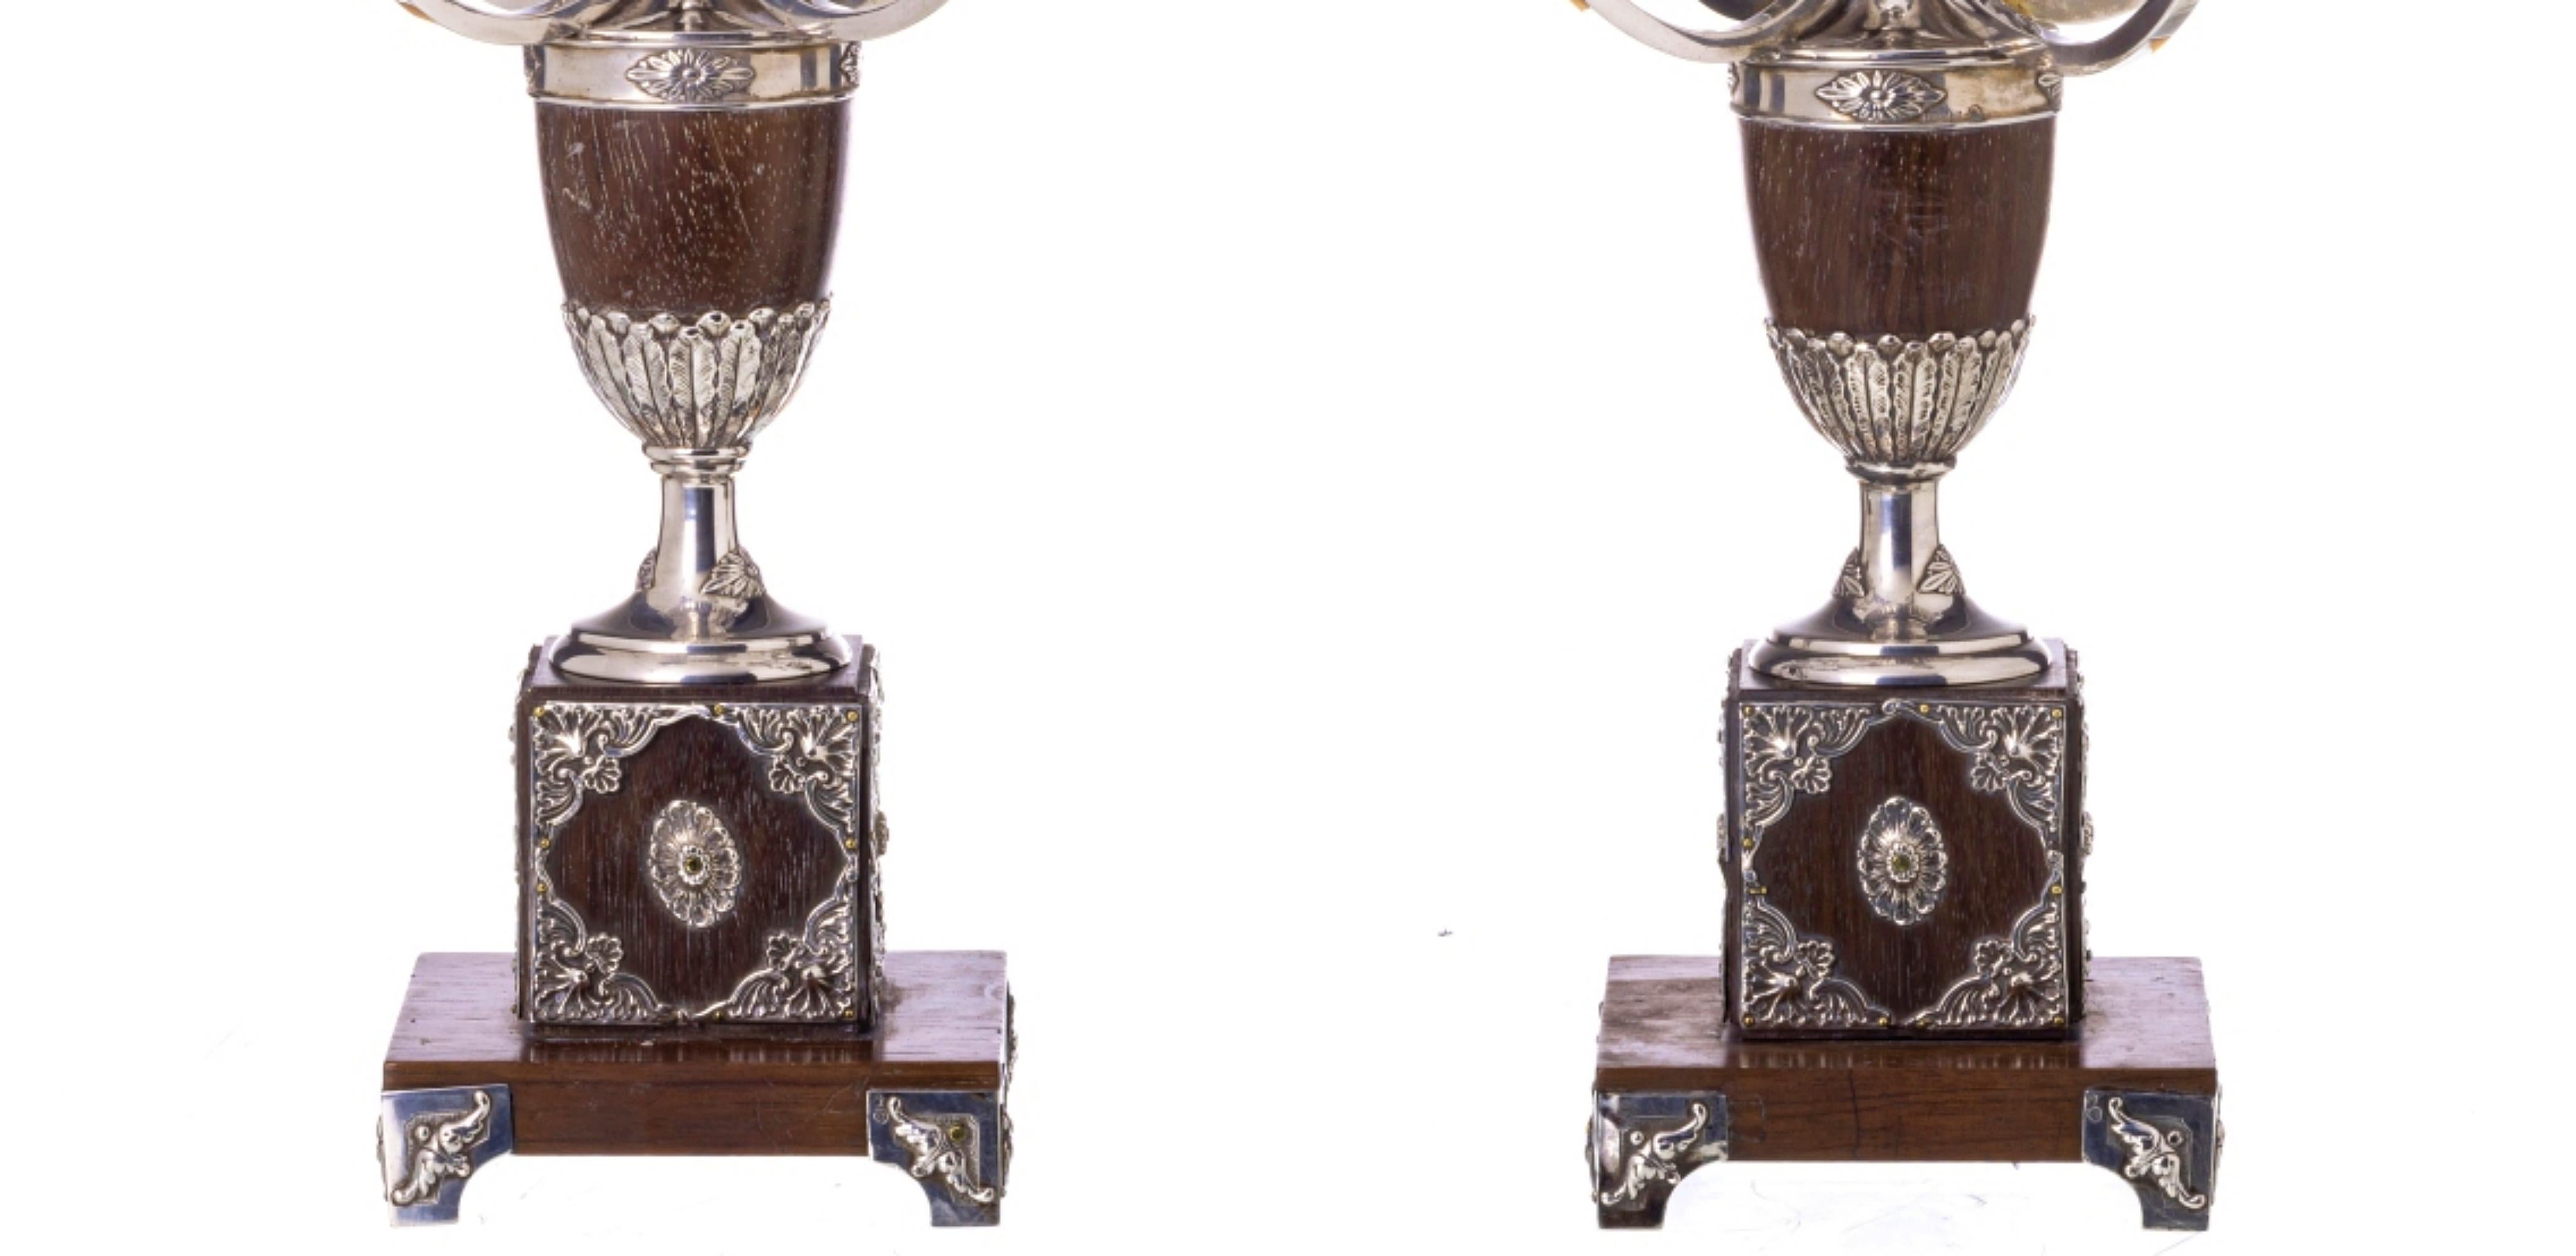 PAIR OF SILVER CANDLESTICKS 19th Century

Portuguese
of five lights, in rosewood wood, with silver applications, with 'boar II' hallmark of 833 thousandths, dated 1887-1937
Height: 46 cm
good conditions.